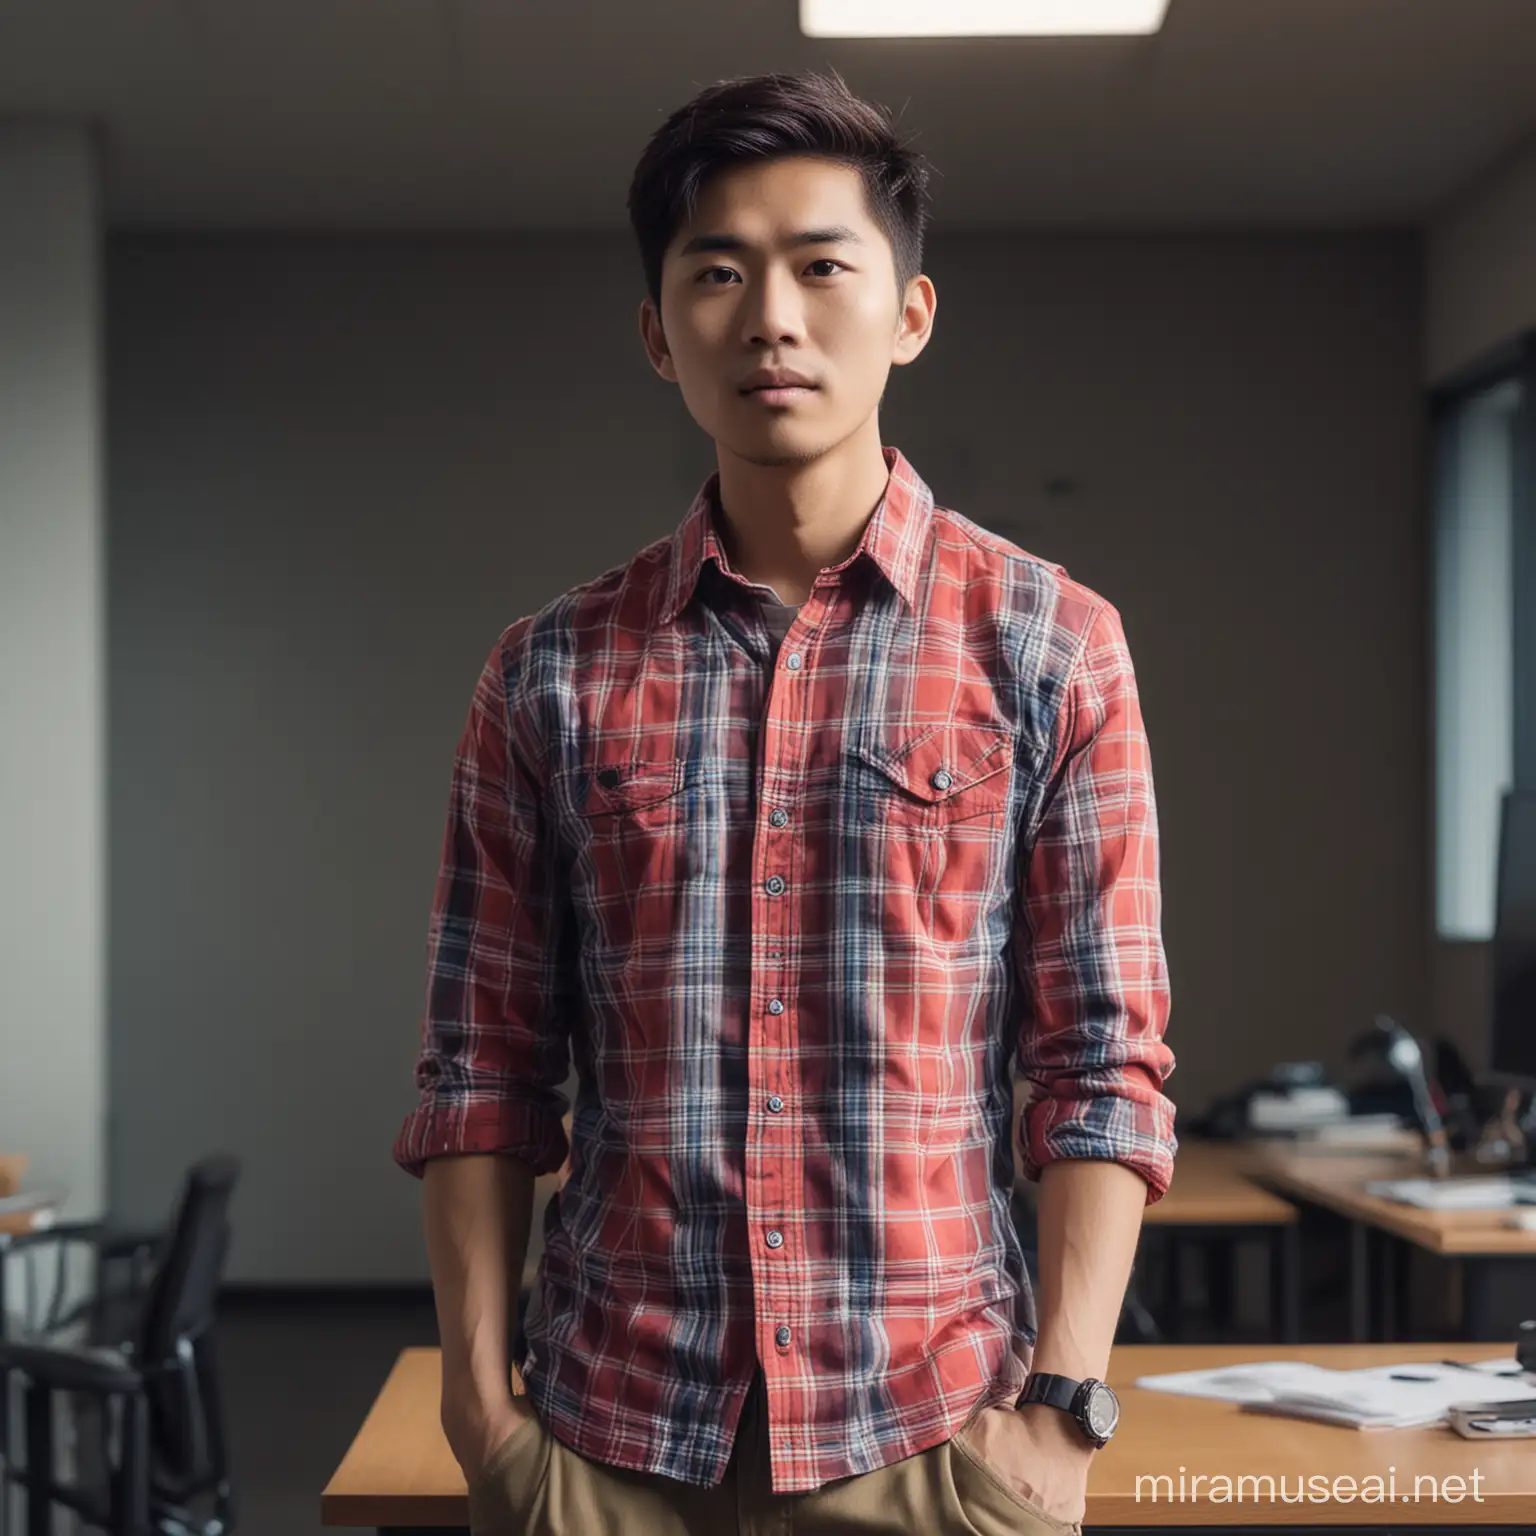 [fullbodyshot portrait] [24 years old Asian male, fluorescent lighting], wearing plaid shirt, wearing wearing sneakers, extremely realistic, 8k, insane details, intricate details, beautifully color graded, stand beside of background is office activity, Color Grading, Editorial Photography, Photography, Bokeh, taken with a 60mm lens, ISO 300, f/4, 1/200th --ar 3:2